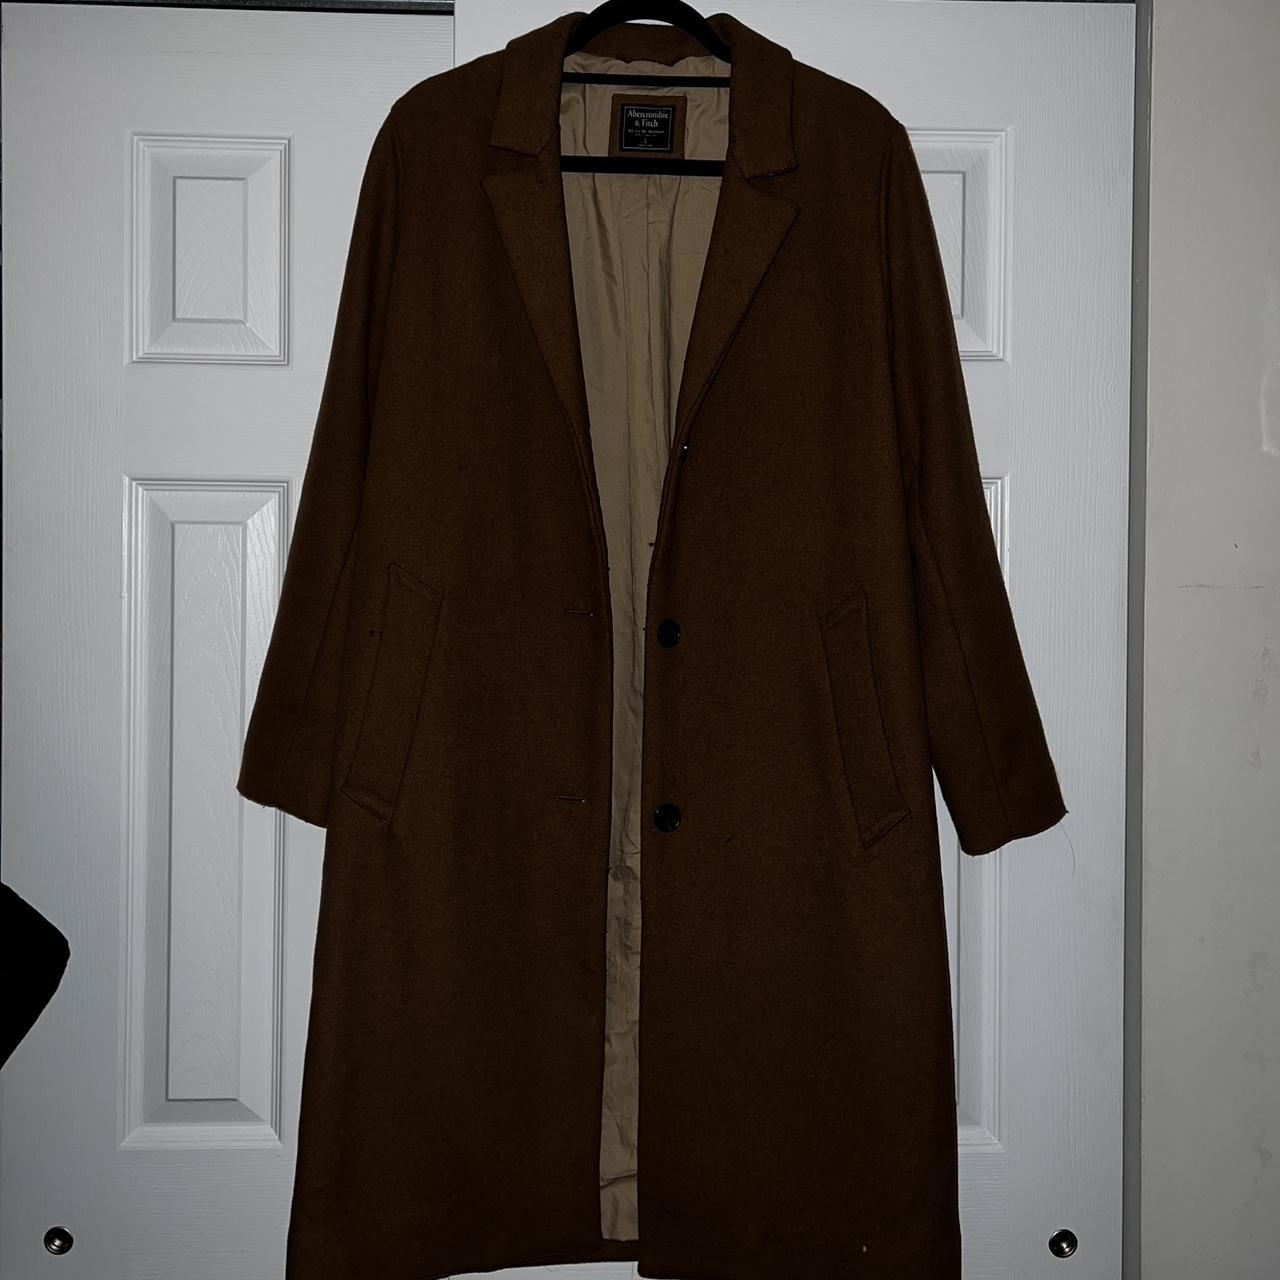 Abercrombie & Fitch Long Wool Coat Has some minor... - Depop